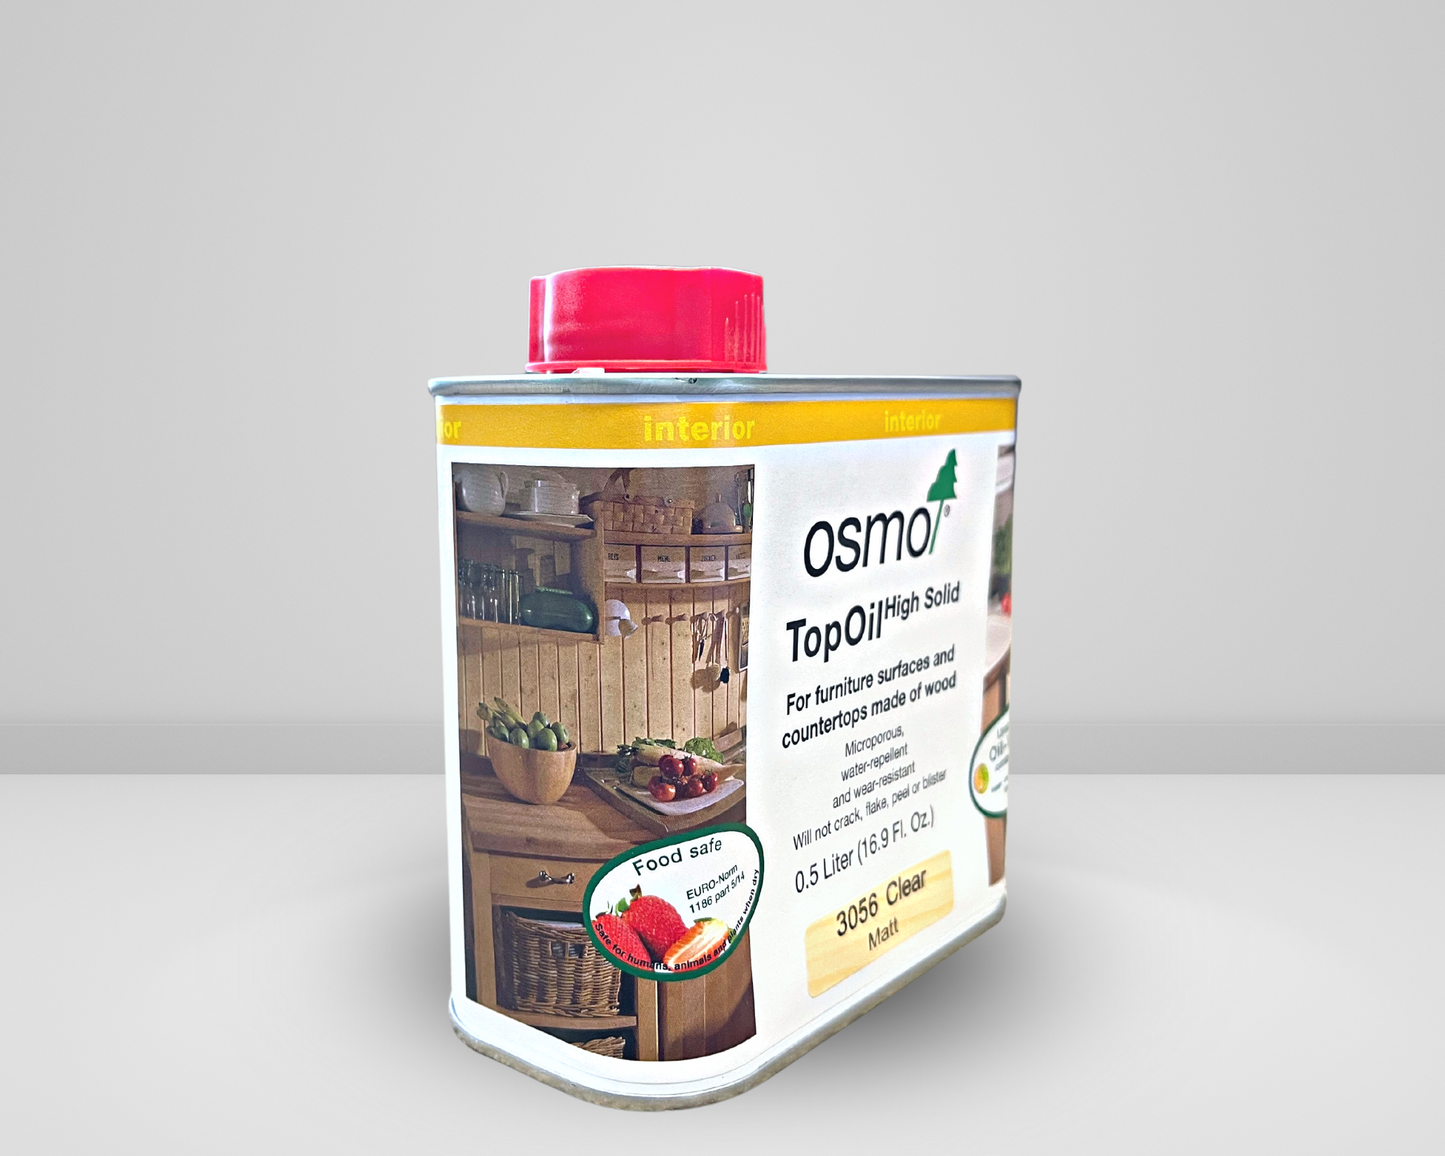 OSMO 3056 <br> TopOil <br> High Solid <br> Clear Matte